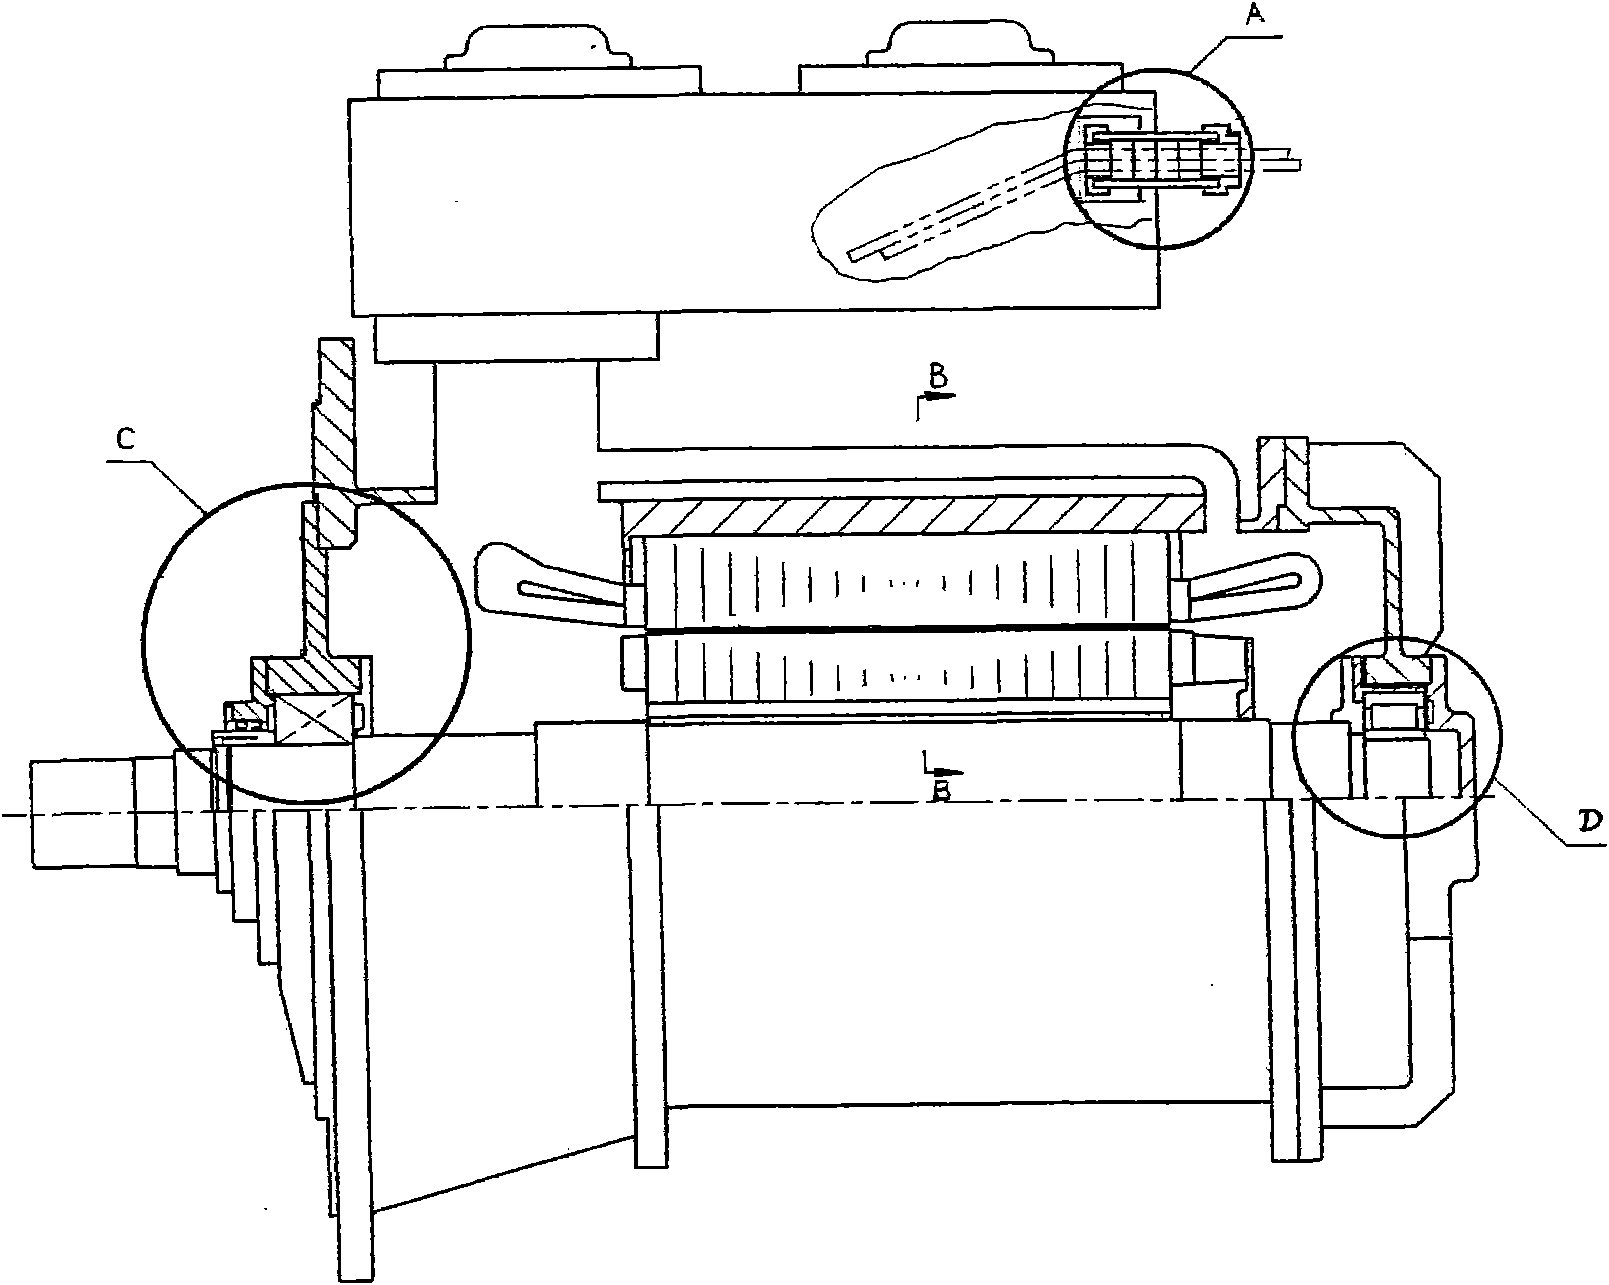 High-speed special submerged motor for engineering ship